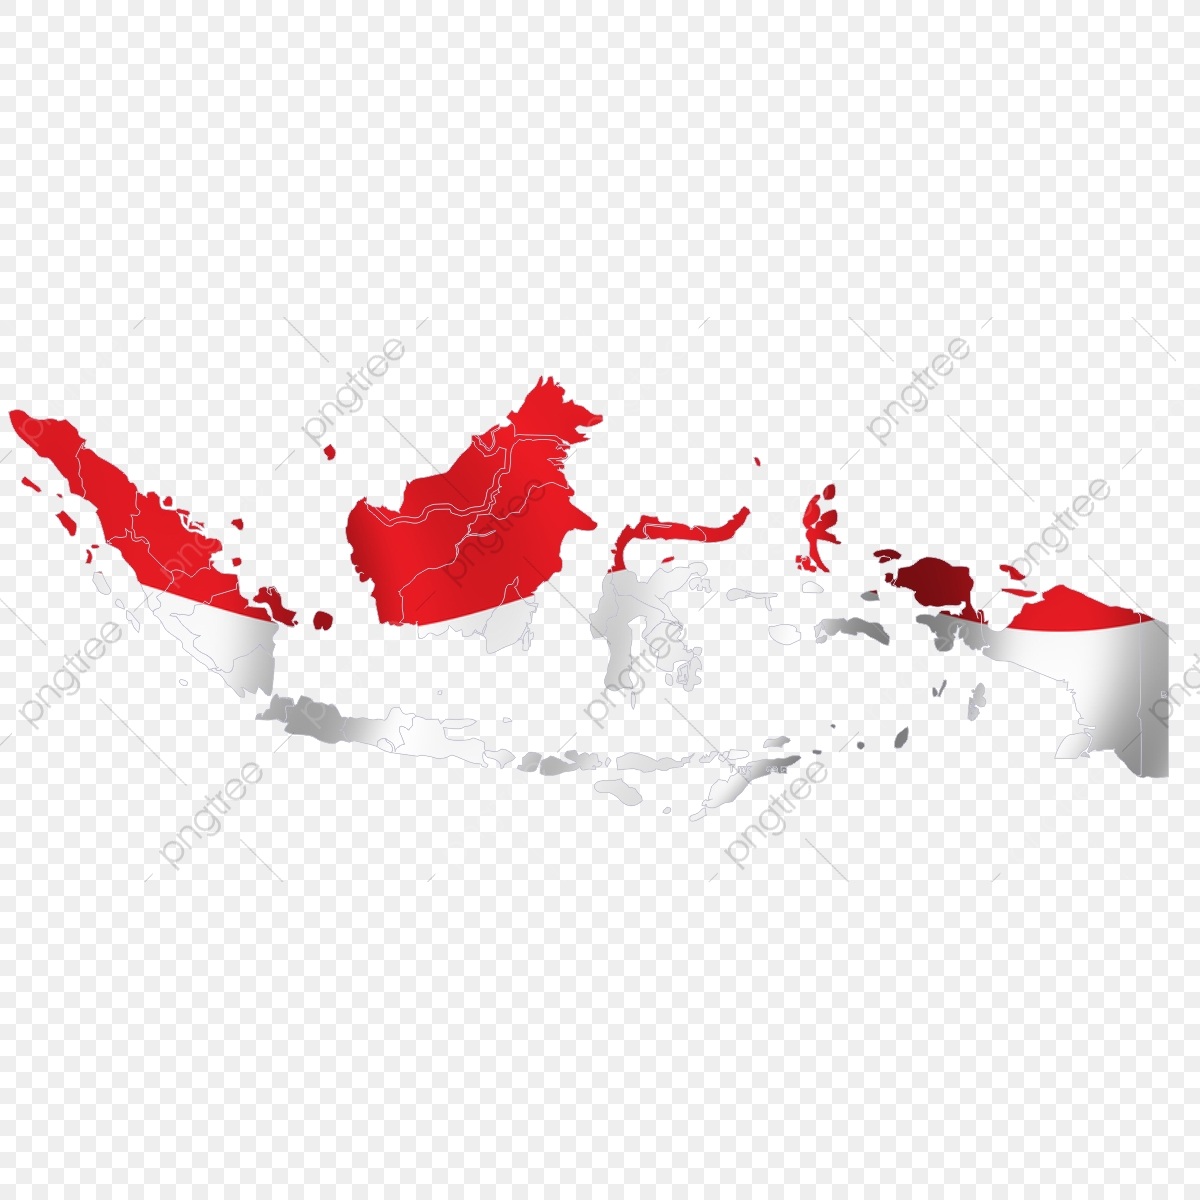 Background Merah Putih Vector At Collection Of